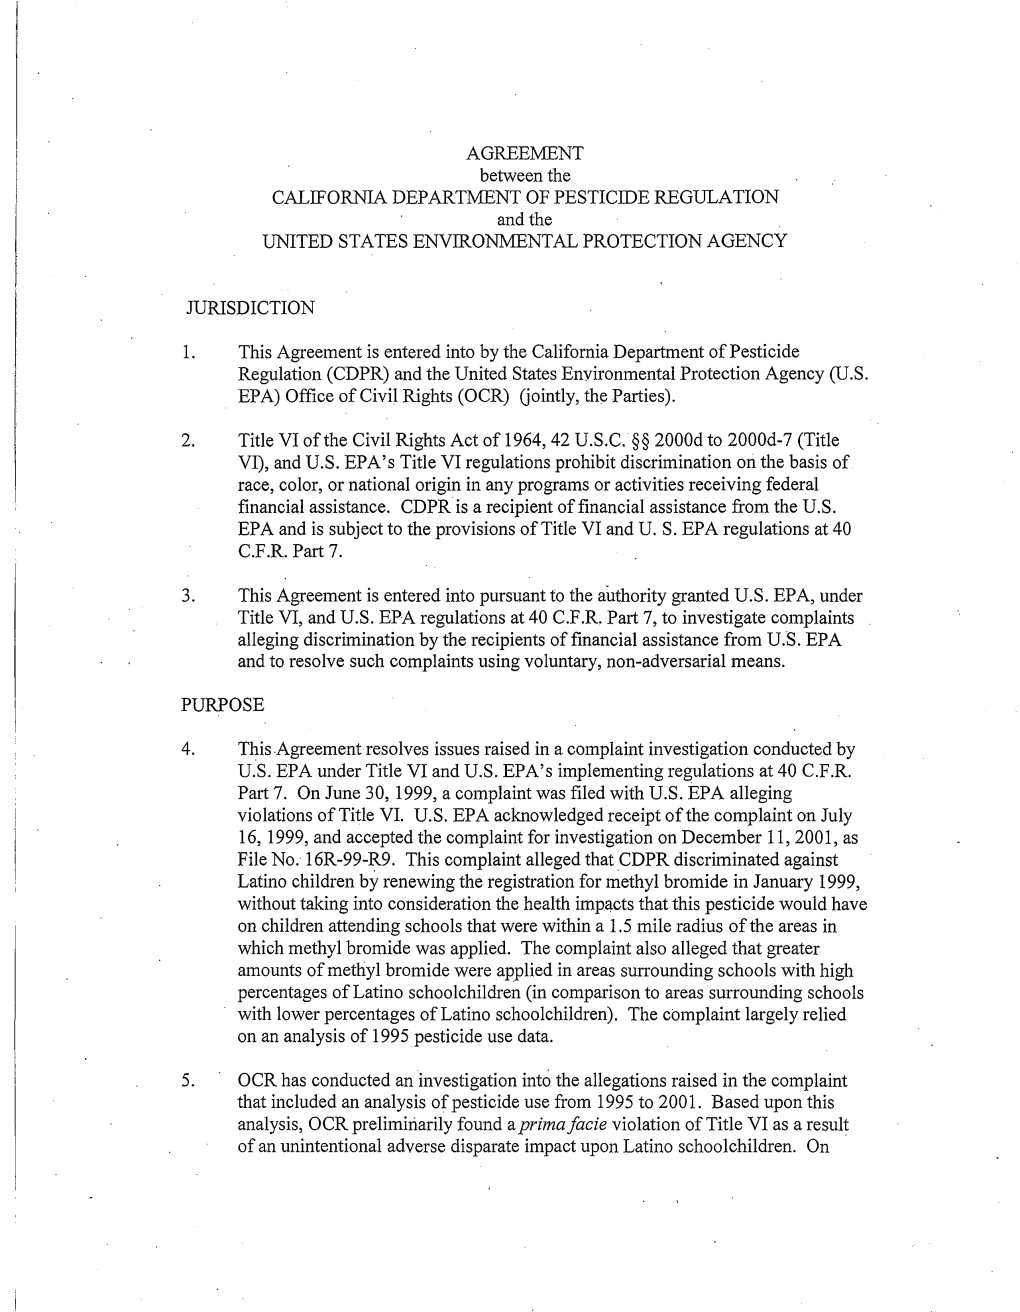 AGREEMENT Between the CALIFORNIA DEPARTMENT of PESTICIDE REGULATION and the UNITED STATES ENVIRONMENTAL PROTECTION AGENCY Mrisdiction